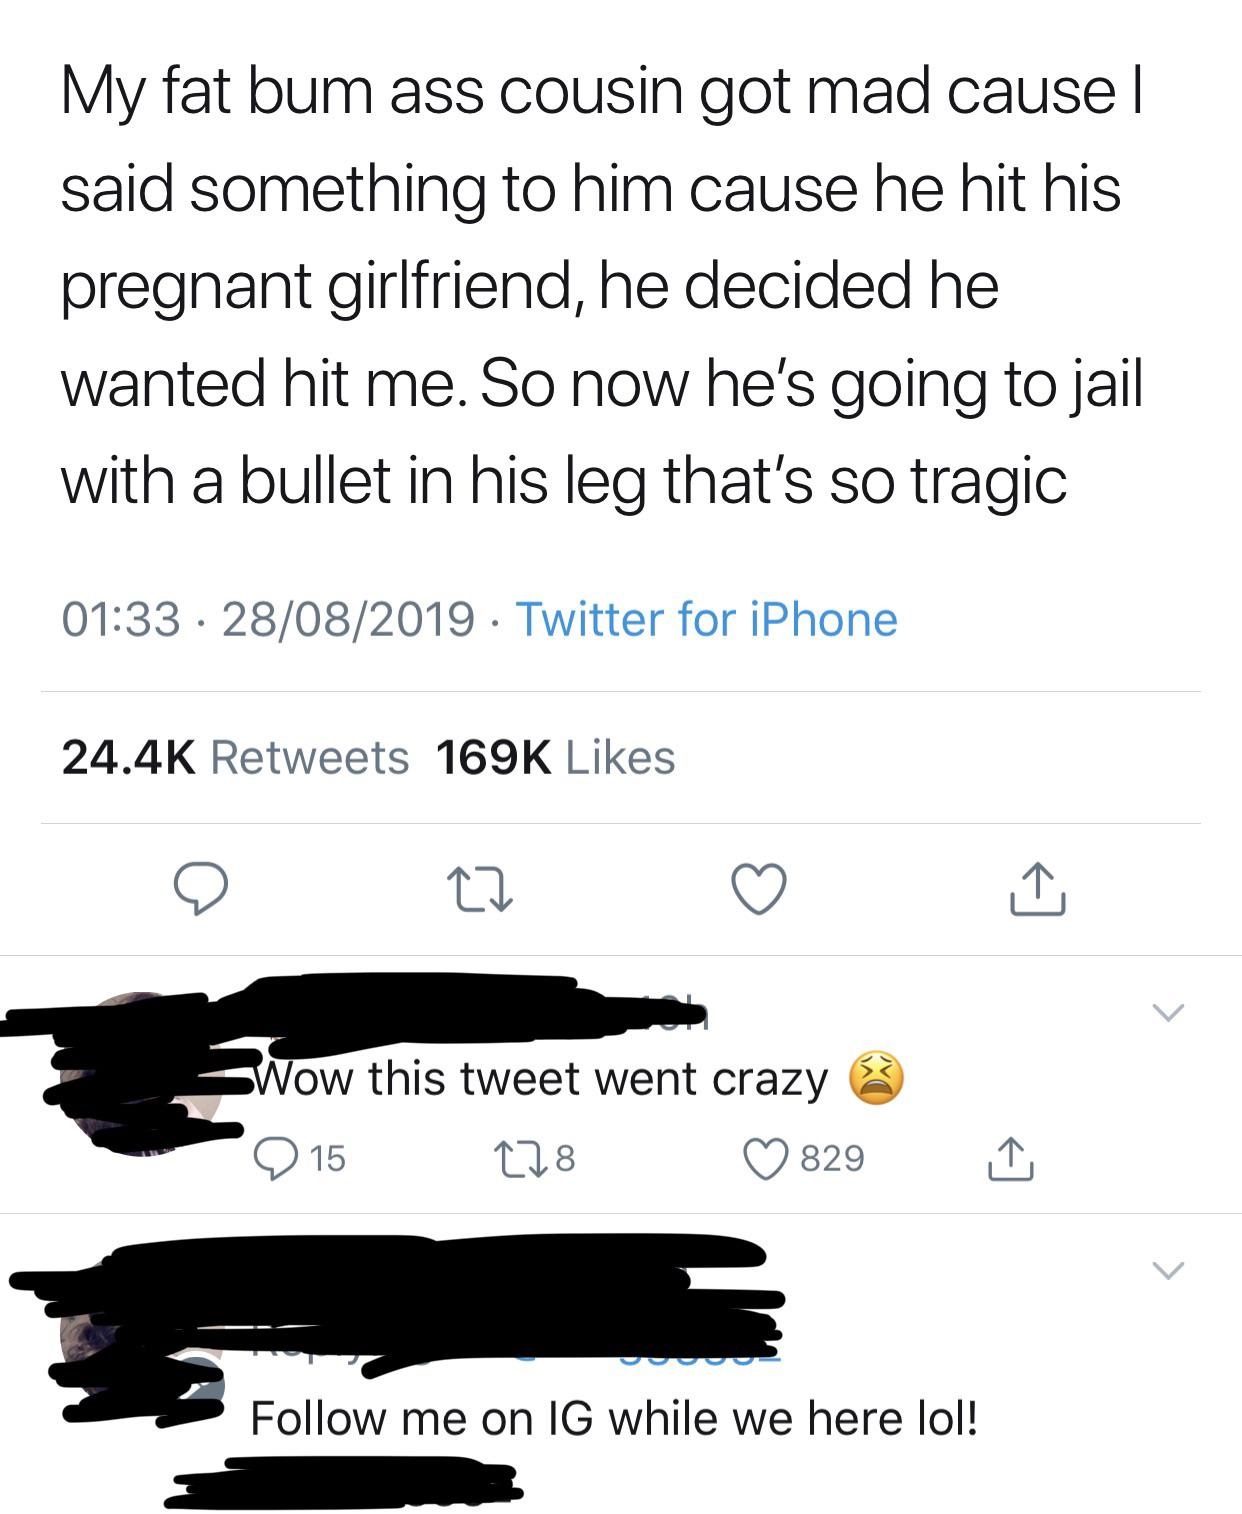 angle - My fat bum ass cousin got mad cause | said something to him cause he hit his pregnant girlfriend, he decided he wanted hit me. So now he's going to jail with a bullet in his leg that's so tragic 28082019 Twitter for iPhone Wow this tweet went craz